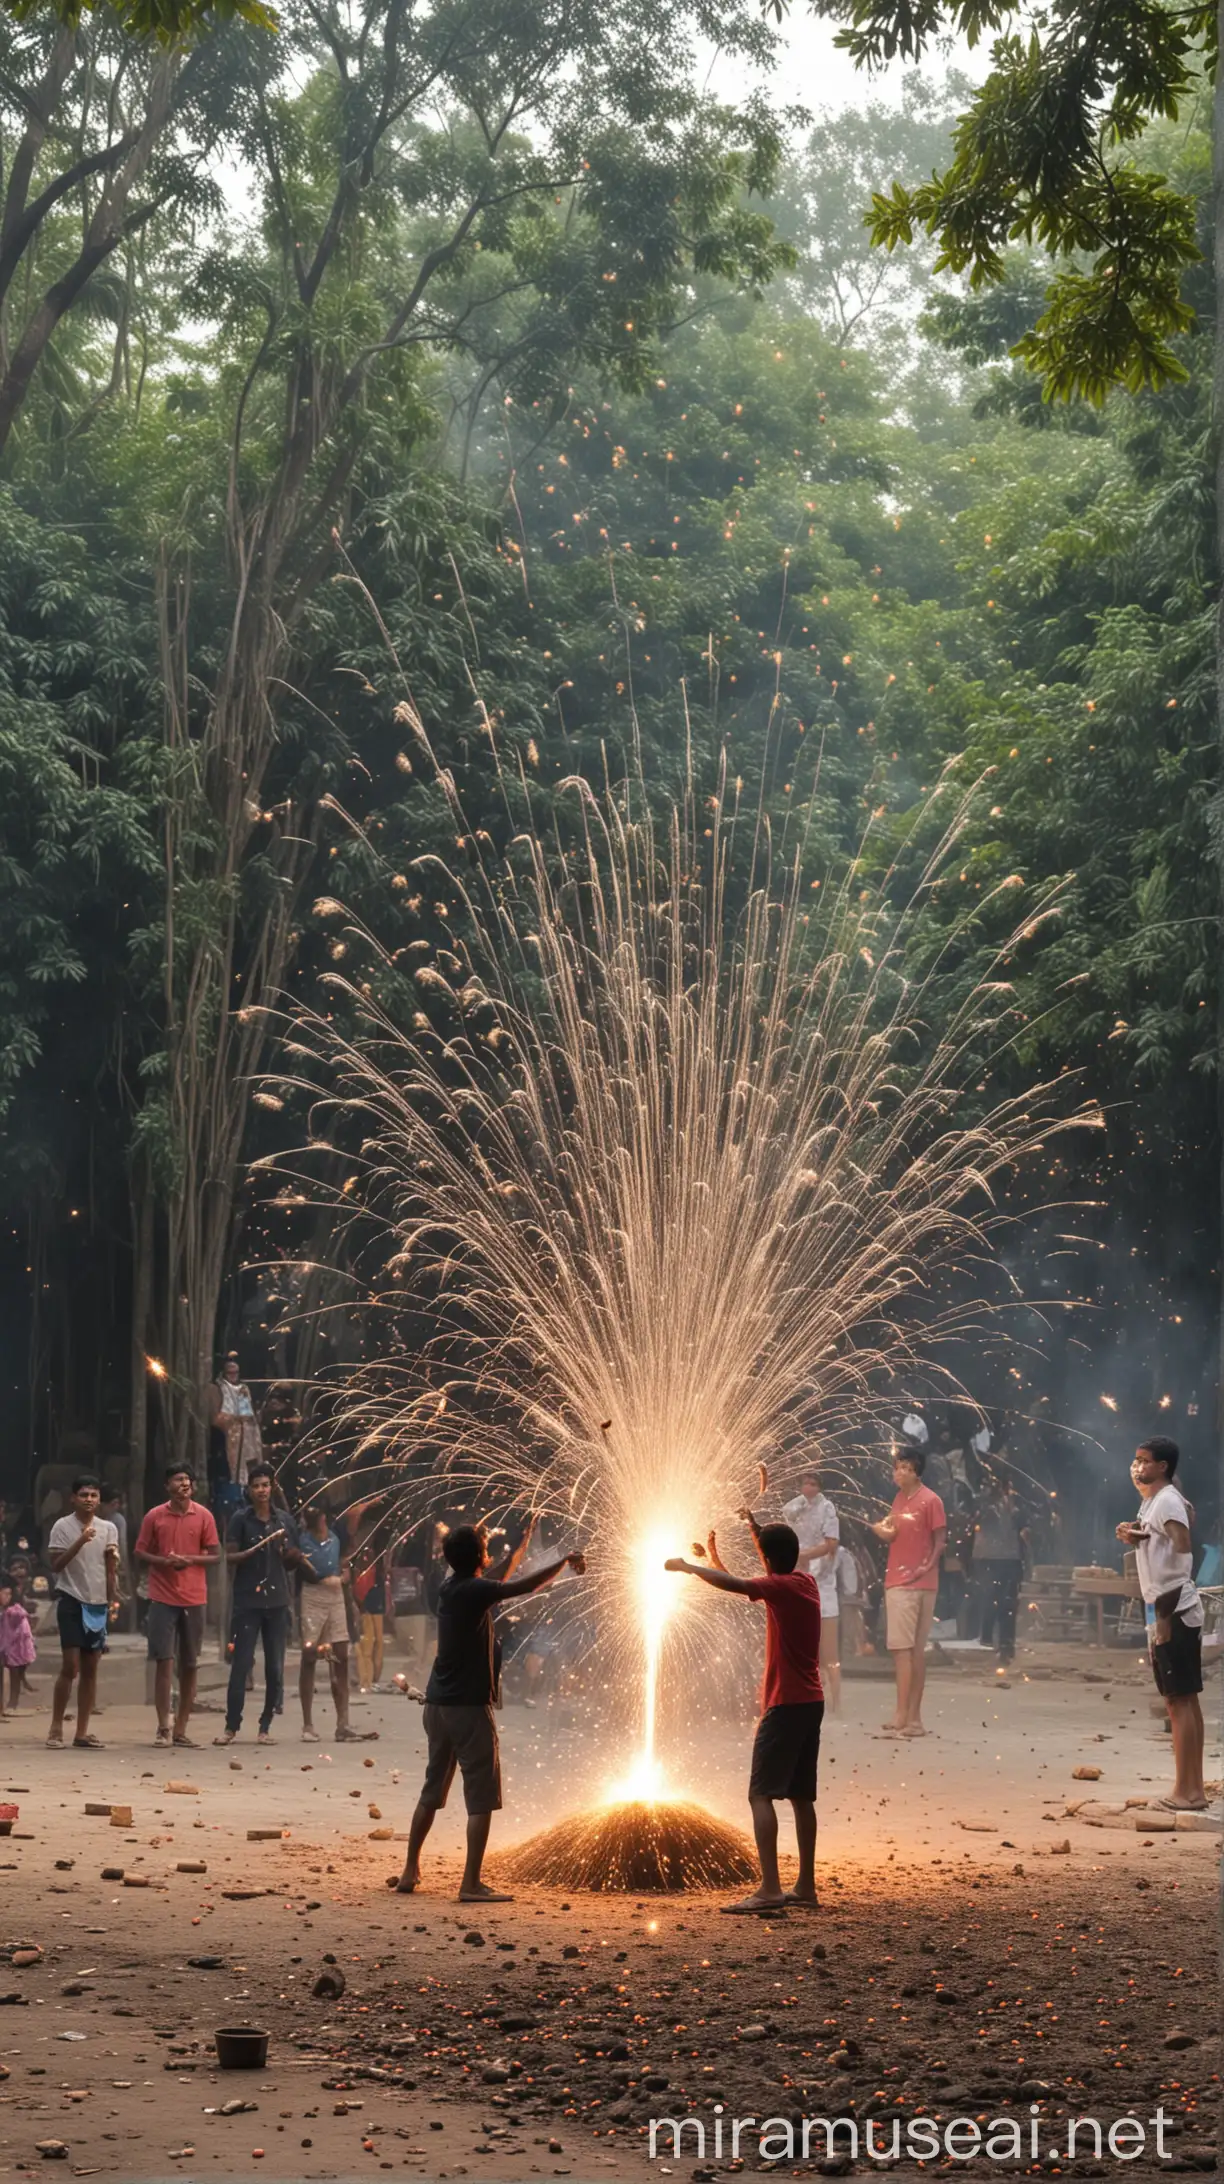 people celebrating by bursting crackers that burst by expeling seeds that allow trees to grow in surrounded area. day time
